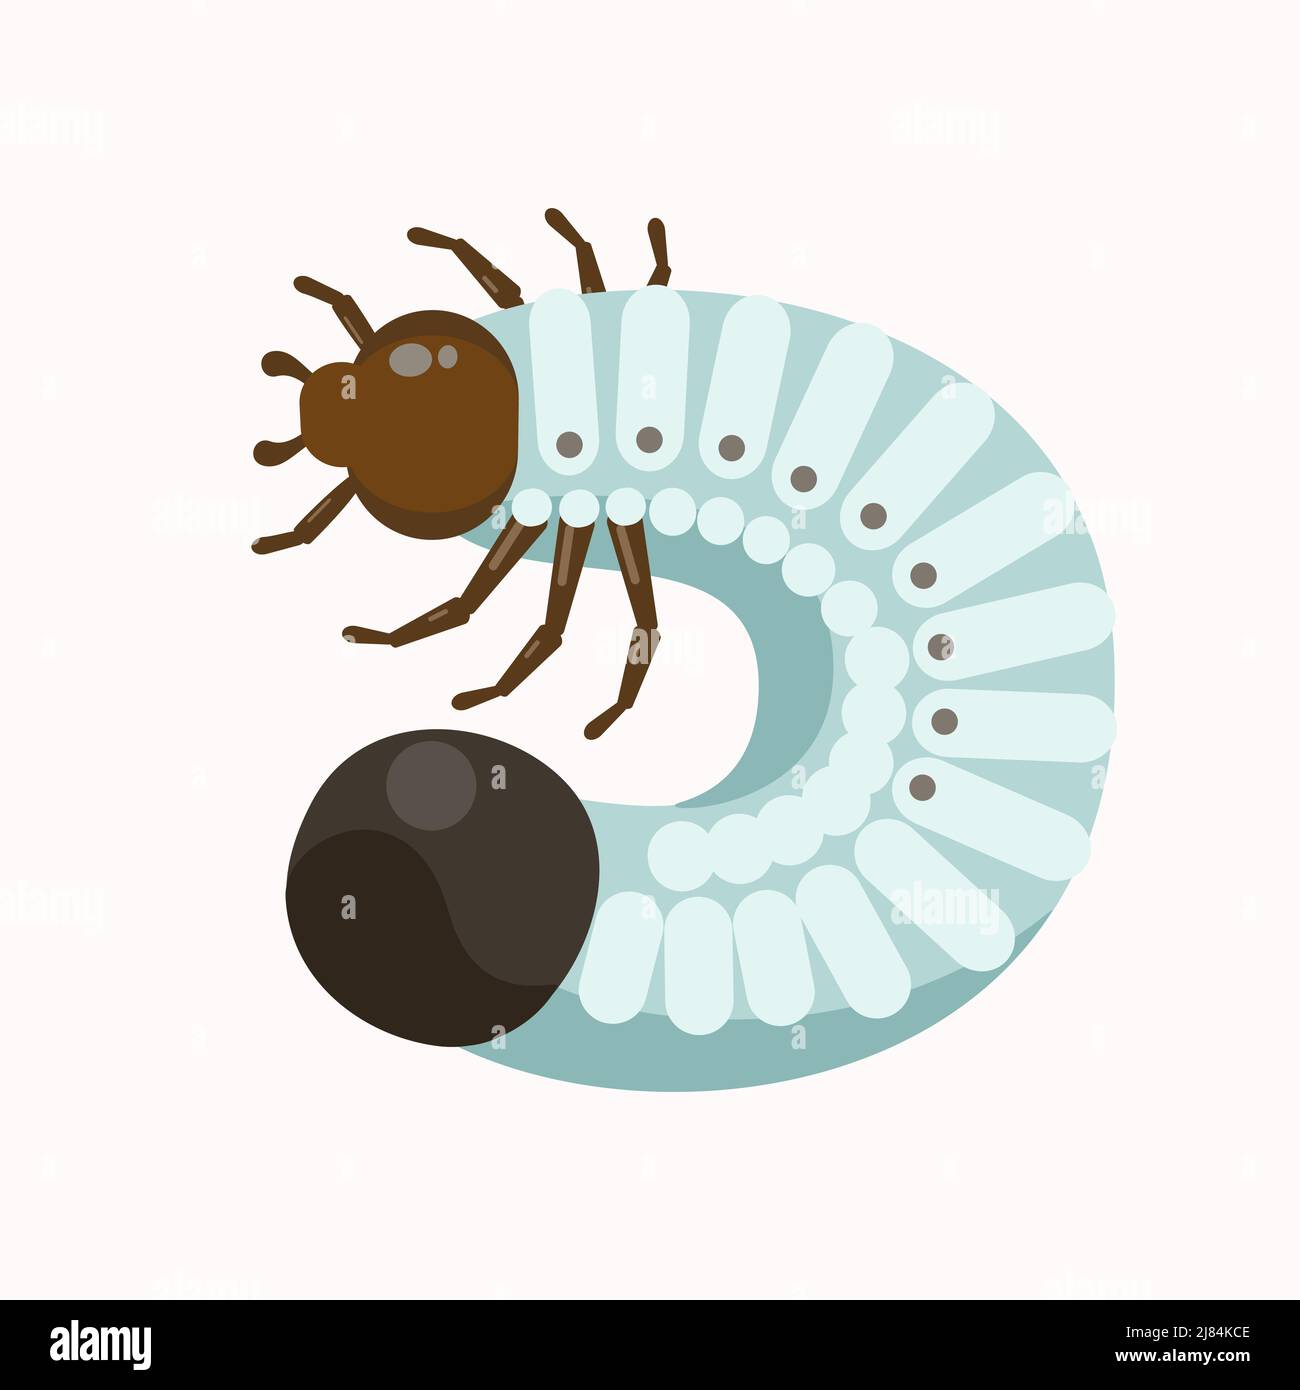 Larva beetle, chafer beetle isolated on white background.  Stock Vector